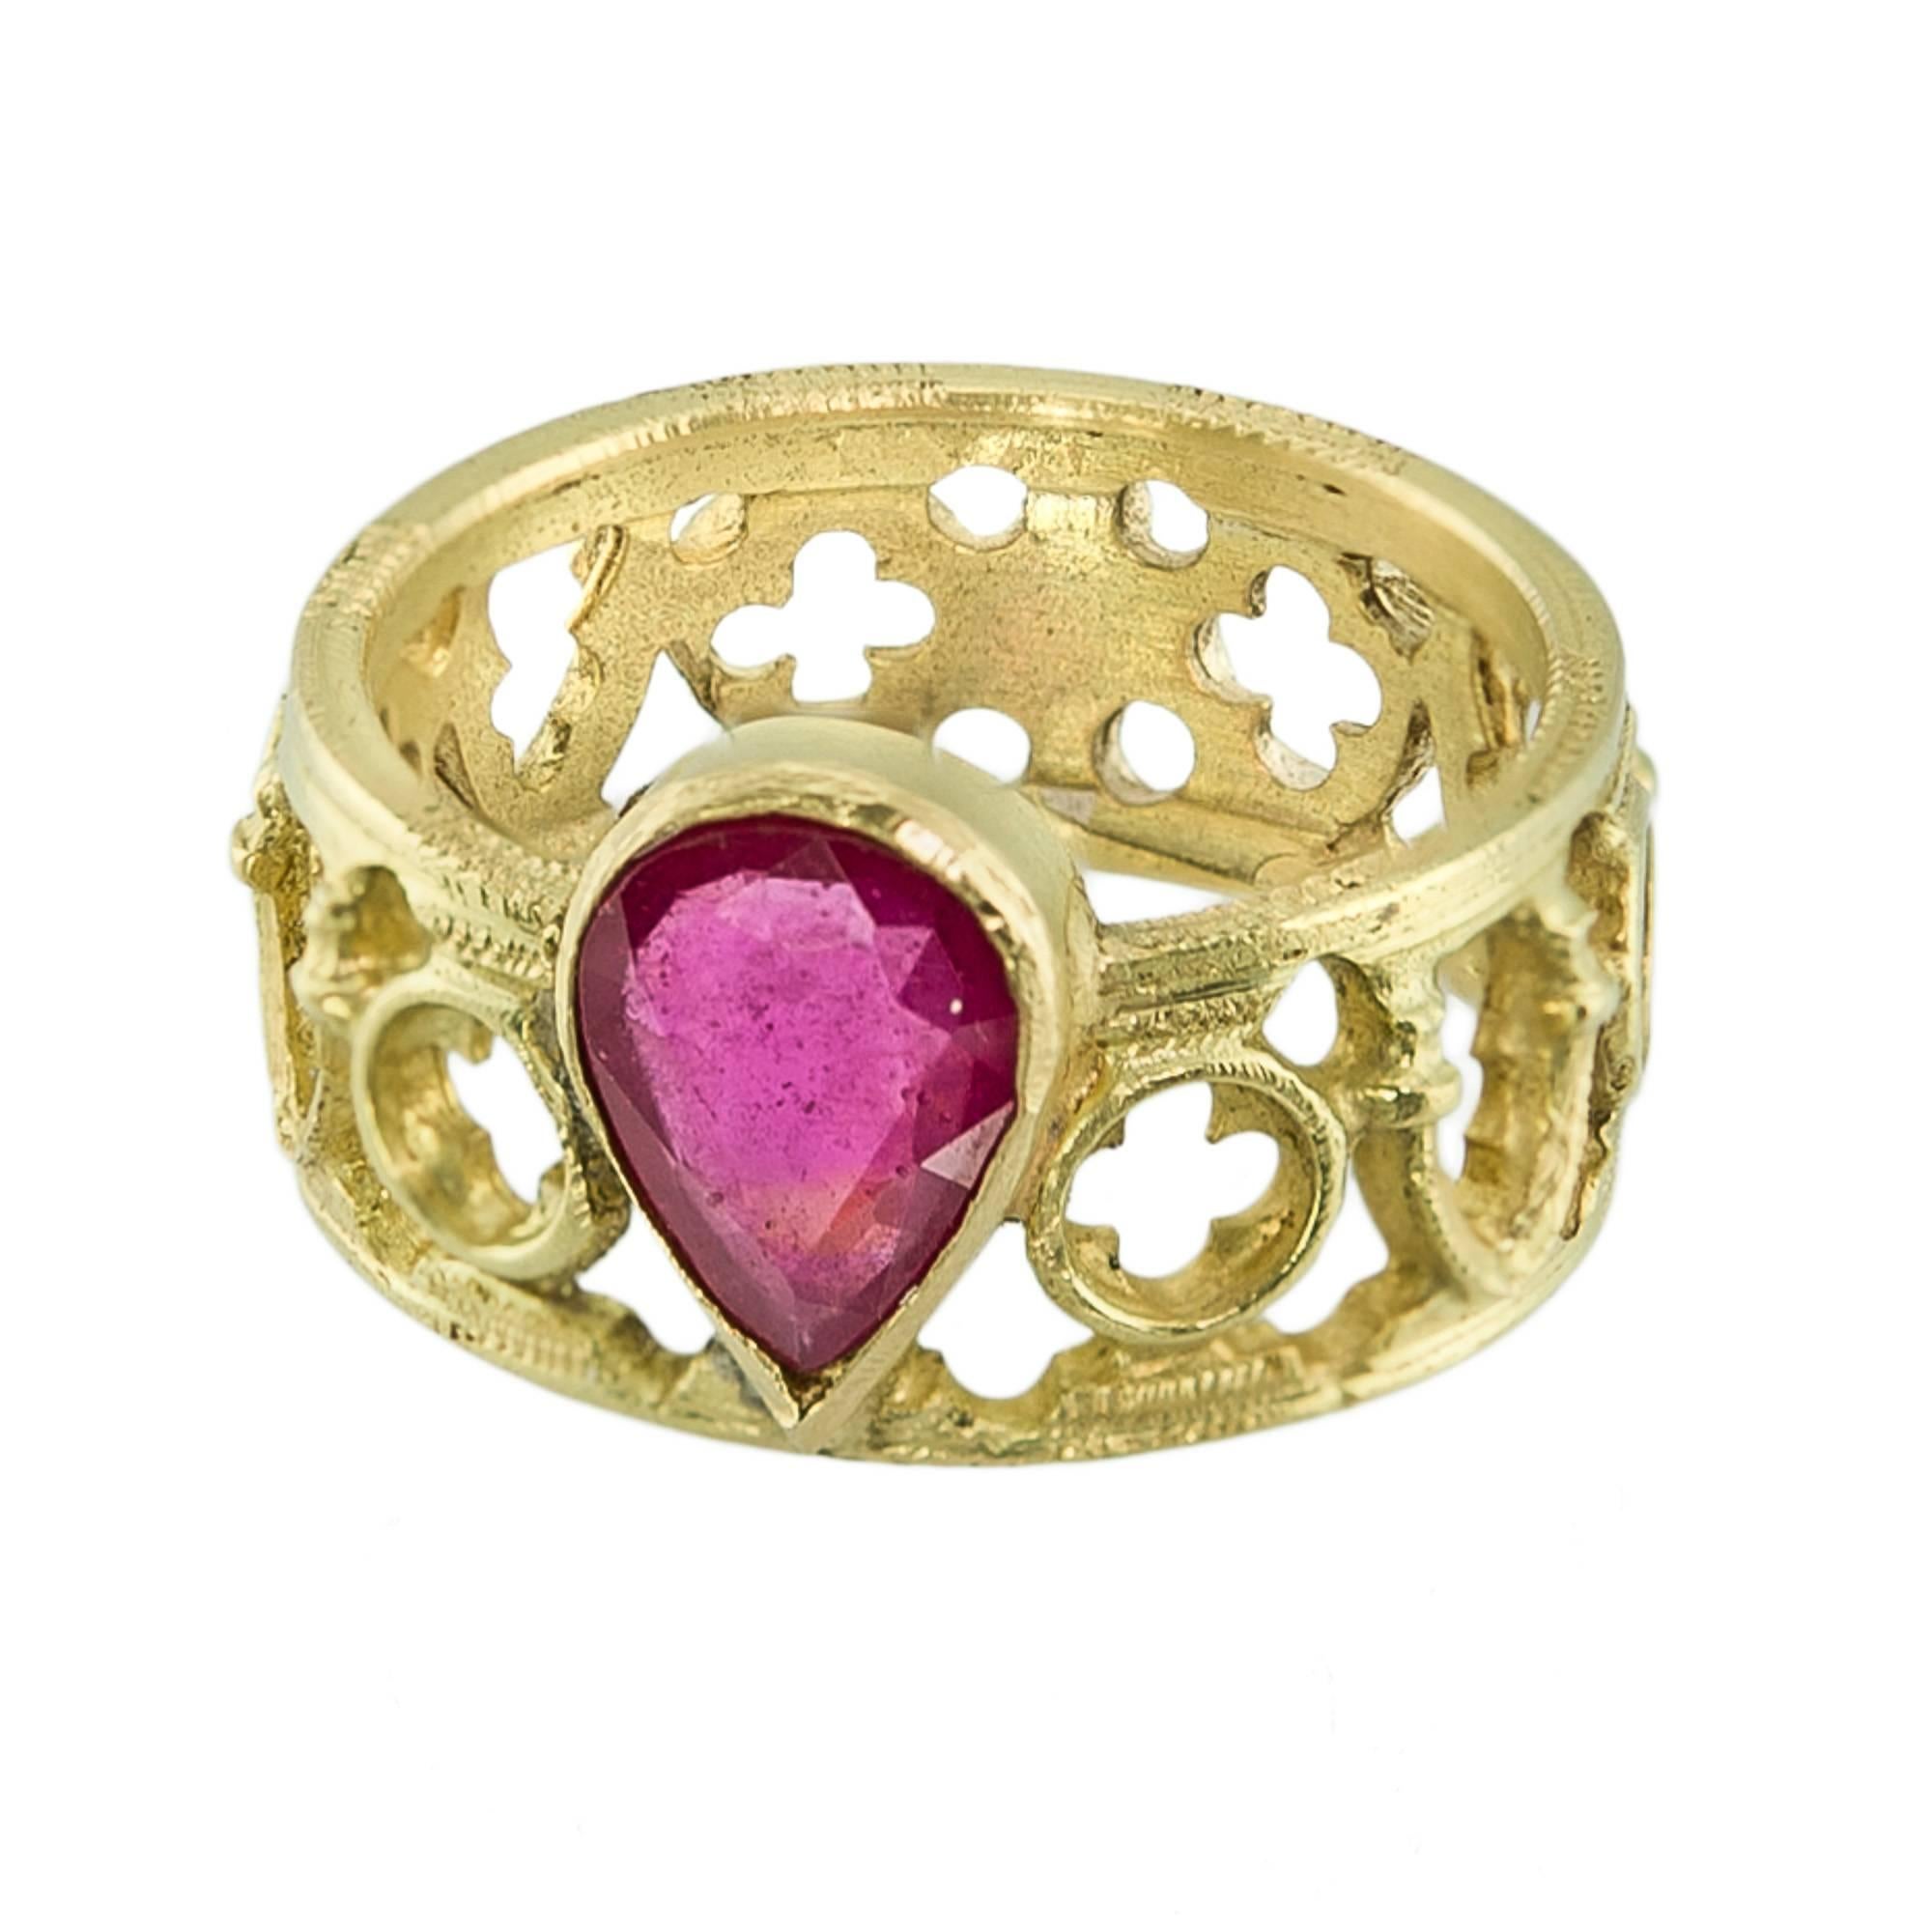 Copy of the nuptial ring of Catherine de' Medici.
Ring made of 18K yellow gold and ruby.
Lost-wax casting and embedding of stones.
Handmade.